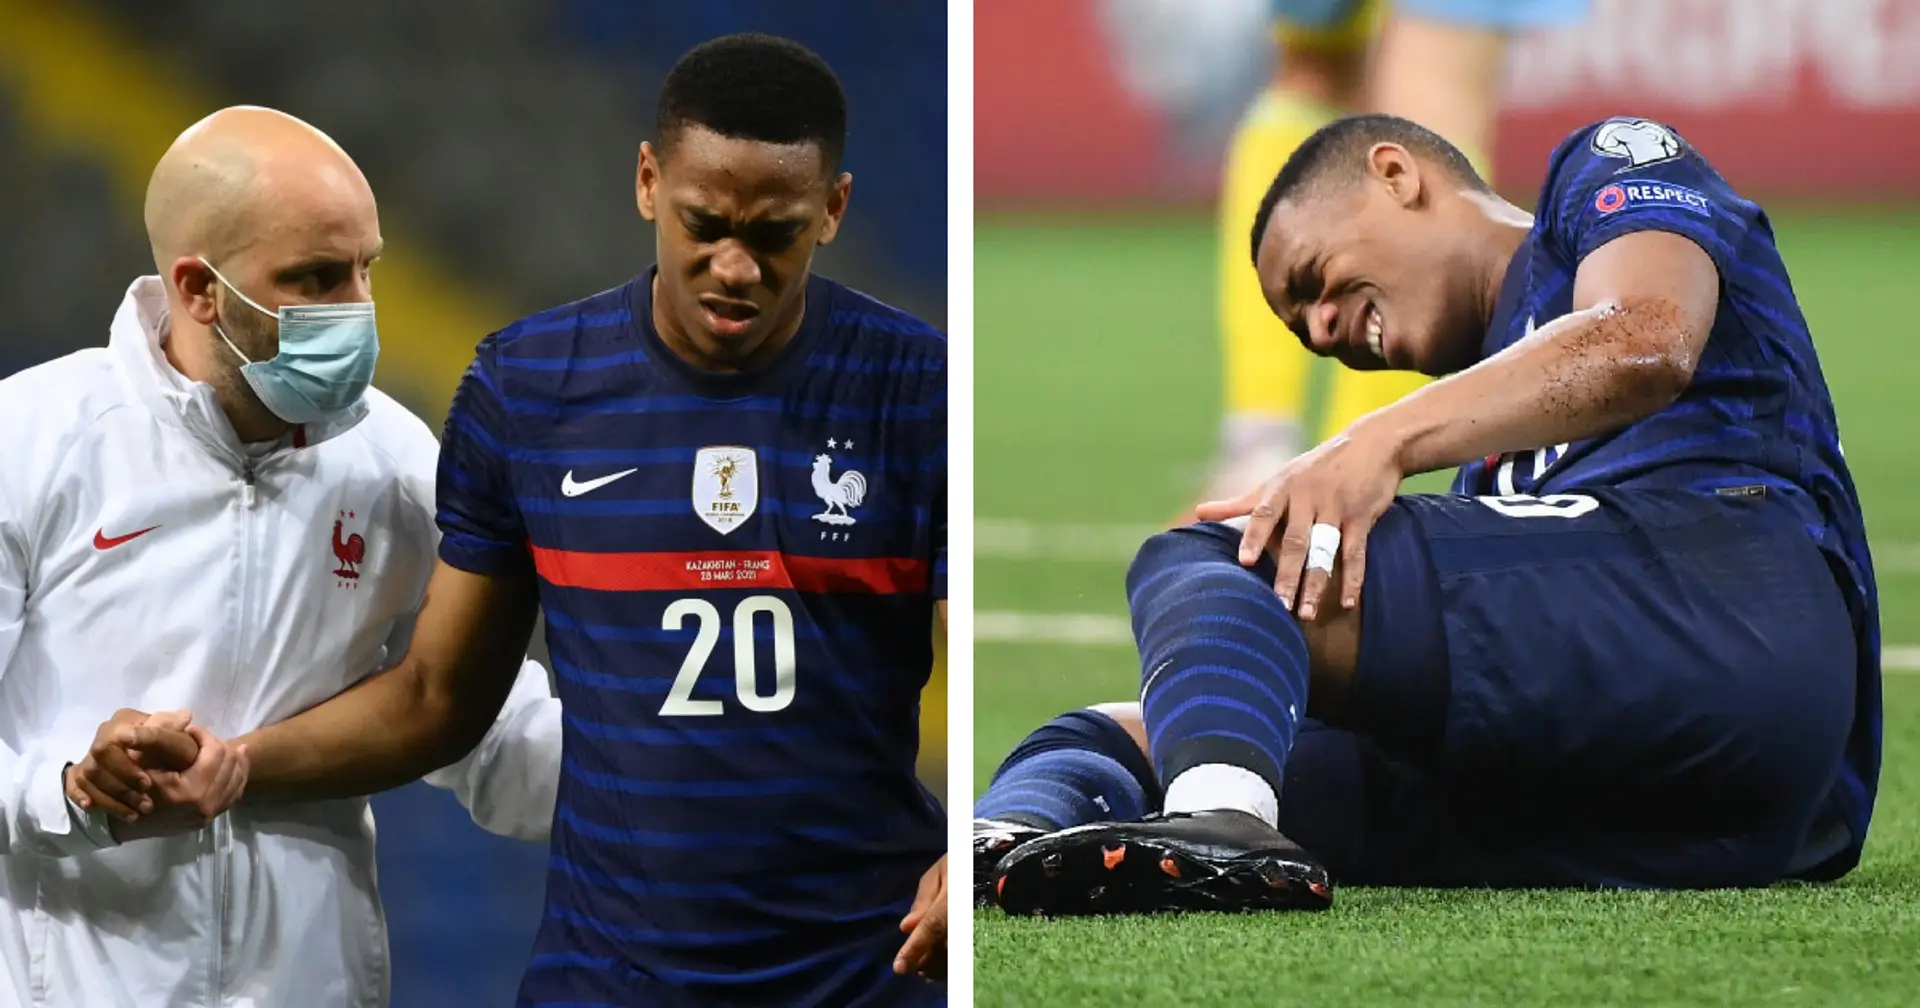 Anthony Martial provides assist for France before limping off in Kazakhstan win